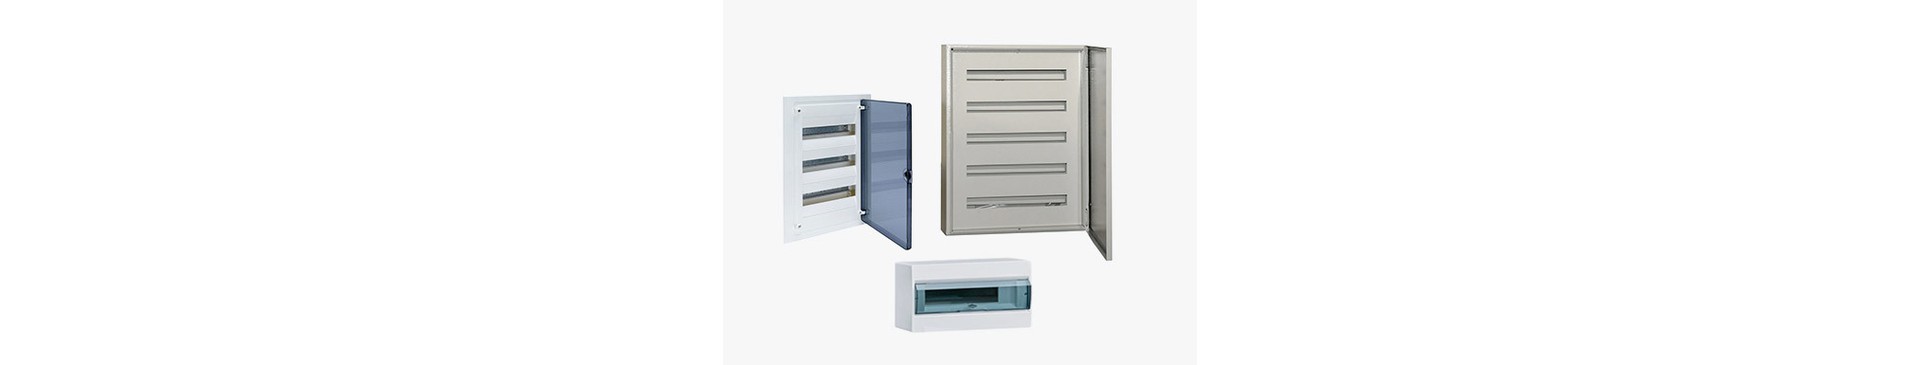 Distribution Boards - Cabinets